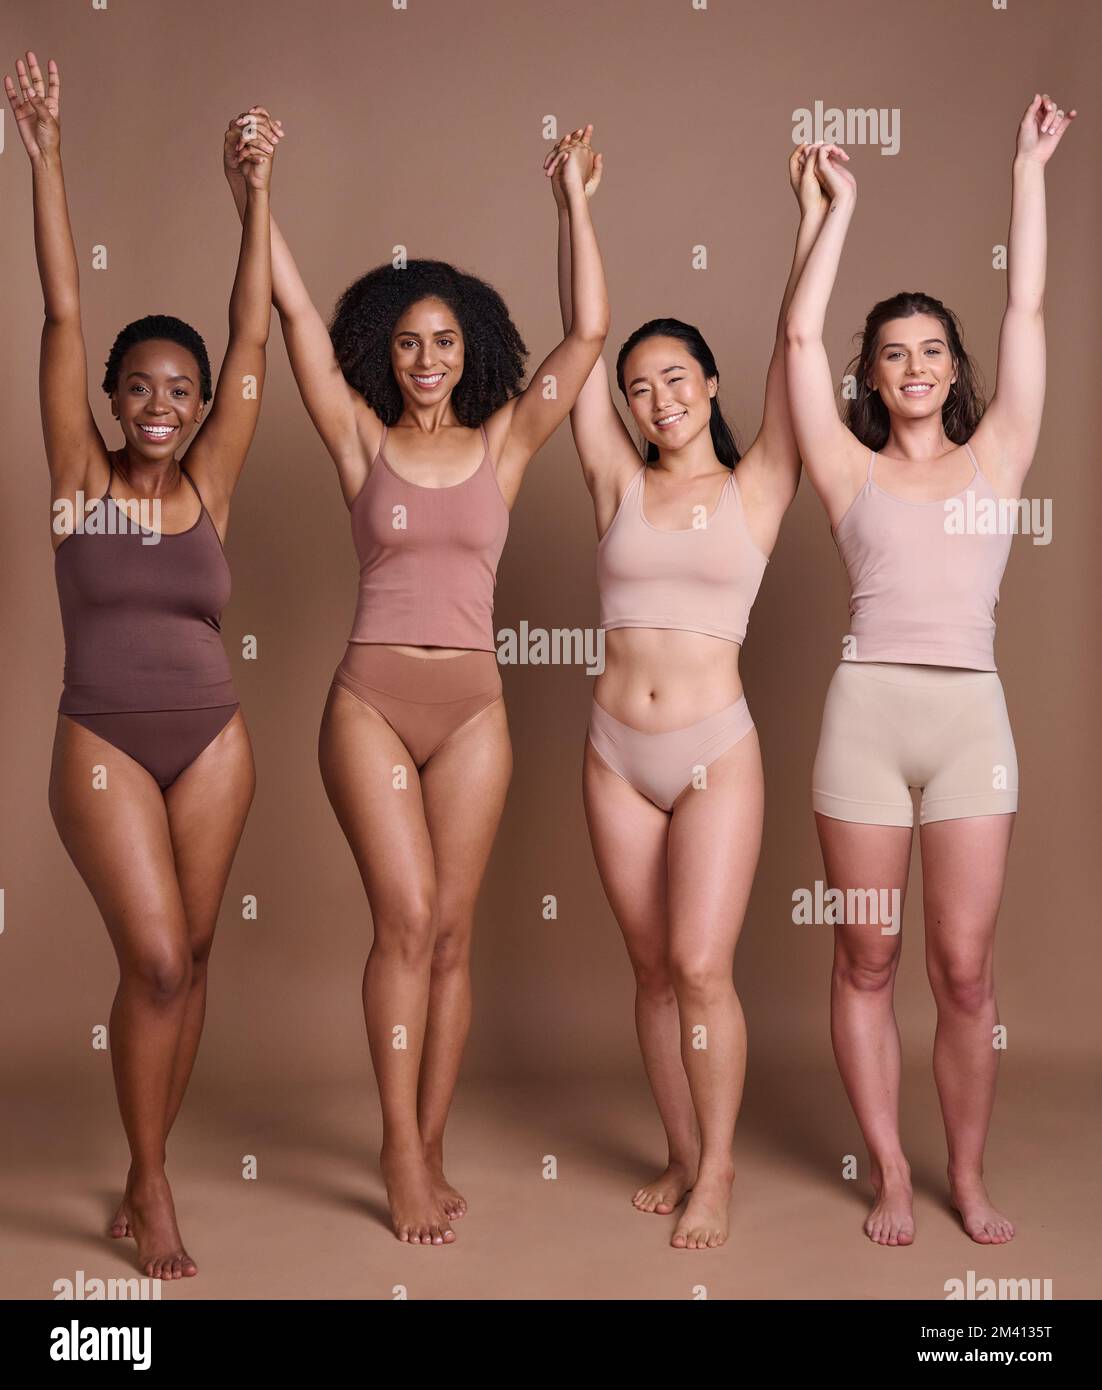 Women diversity, body positivity and skin color celebration of group of model friends holding hands. Skincare beauty, trust and woman community Stock Photo